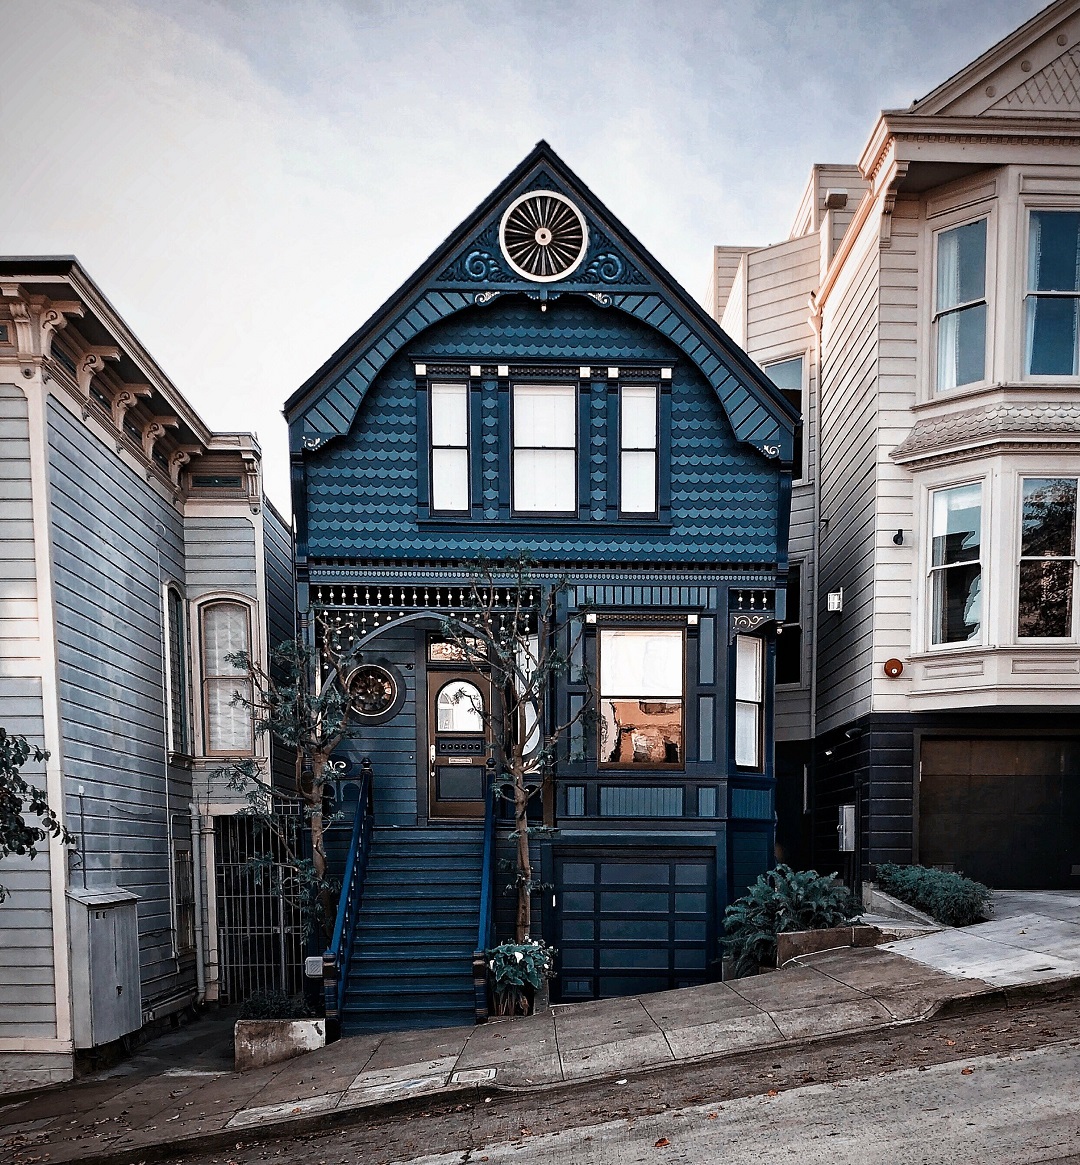 Shades Of Blue Highlight This San Francisco Victorian Home